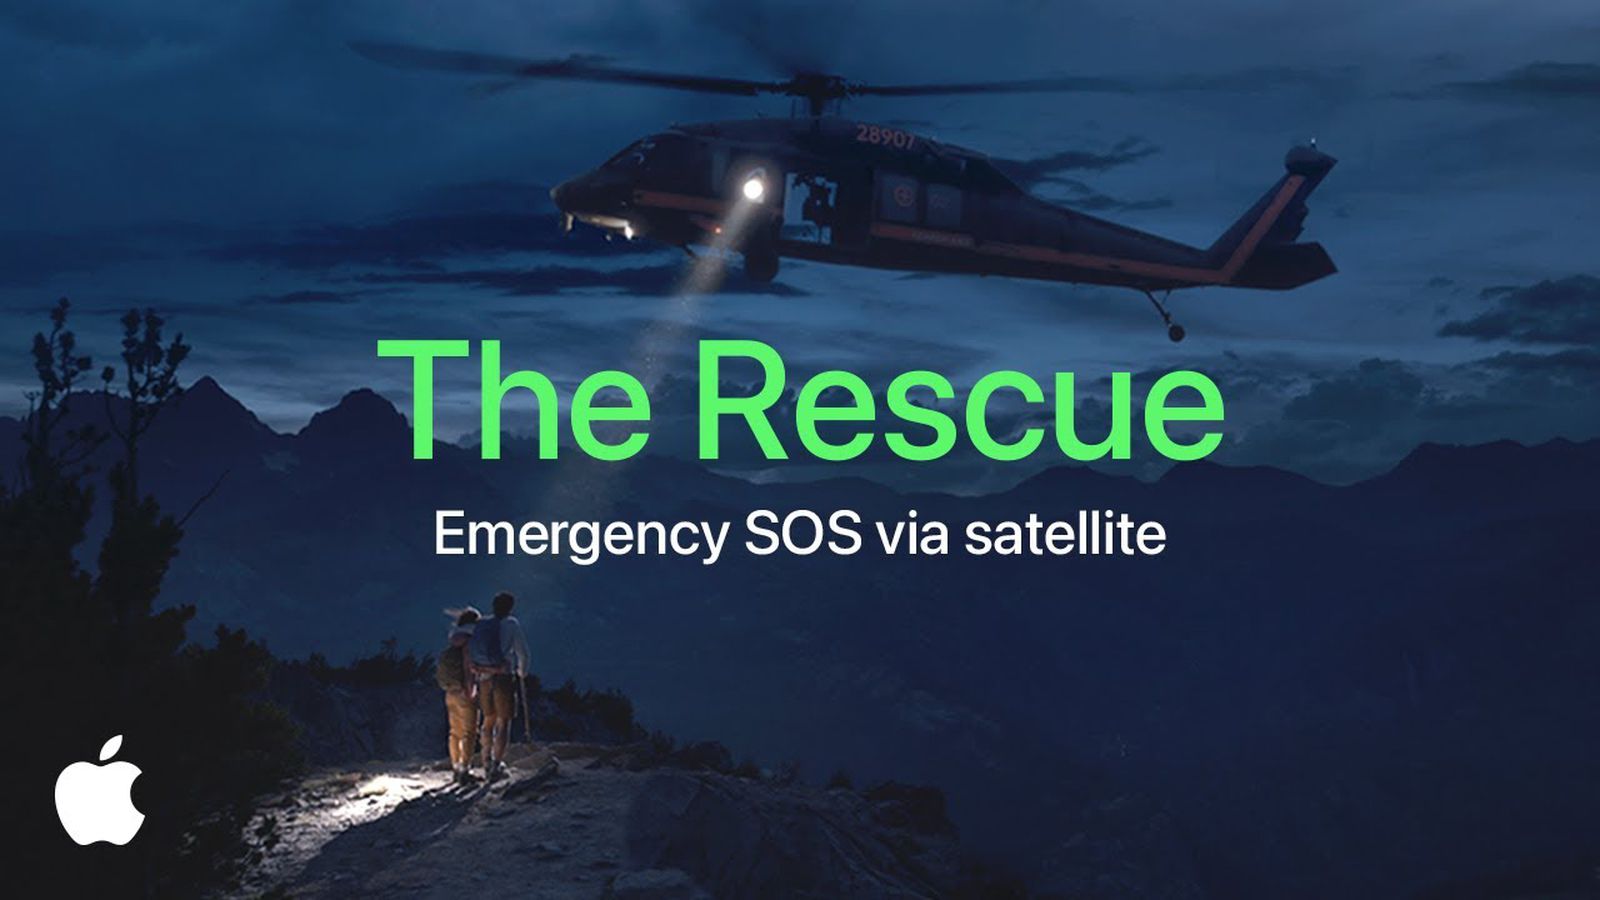 Apple Demonstrates Emergency SOS via Satellite in New Ad as Feature Launches - macrumors.com